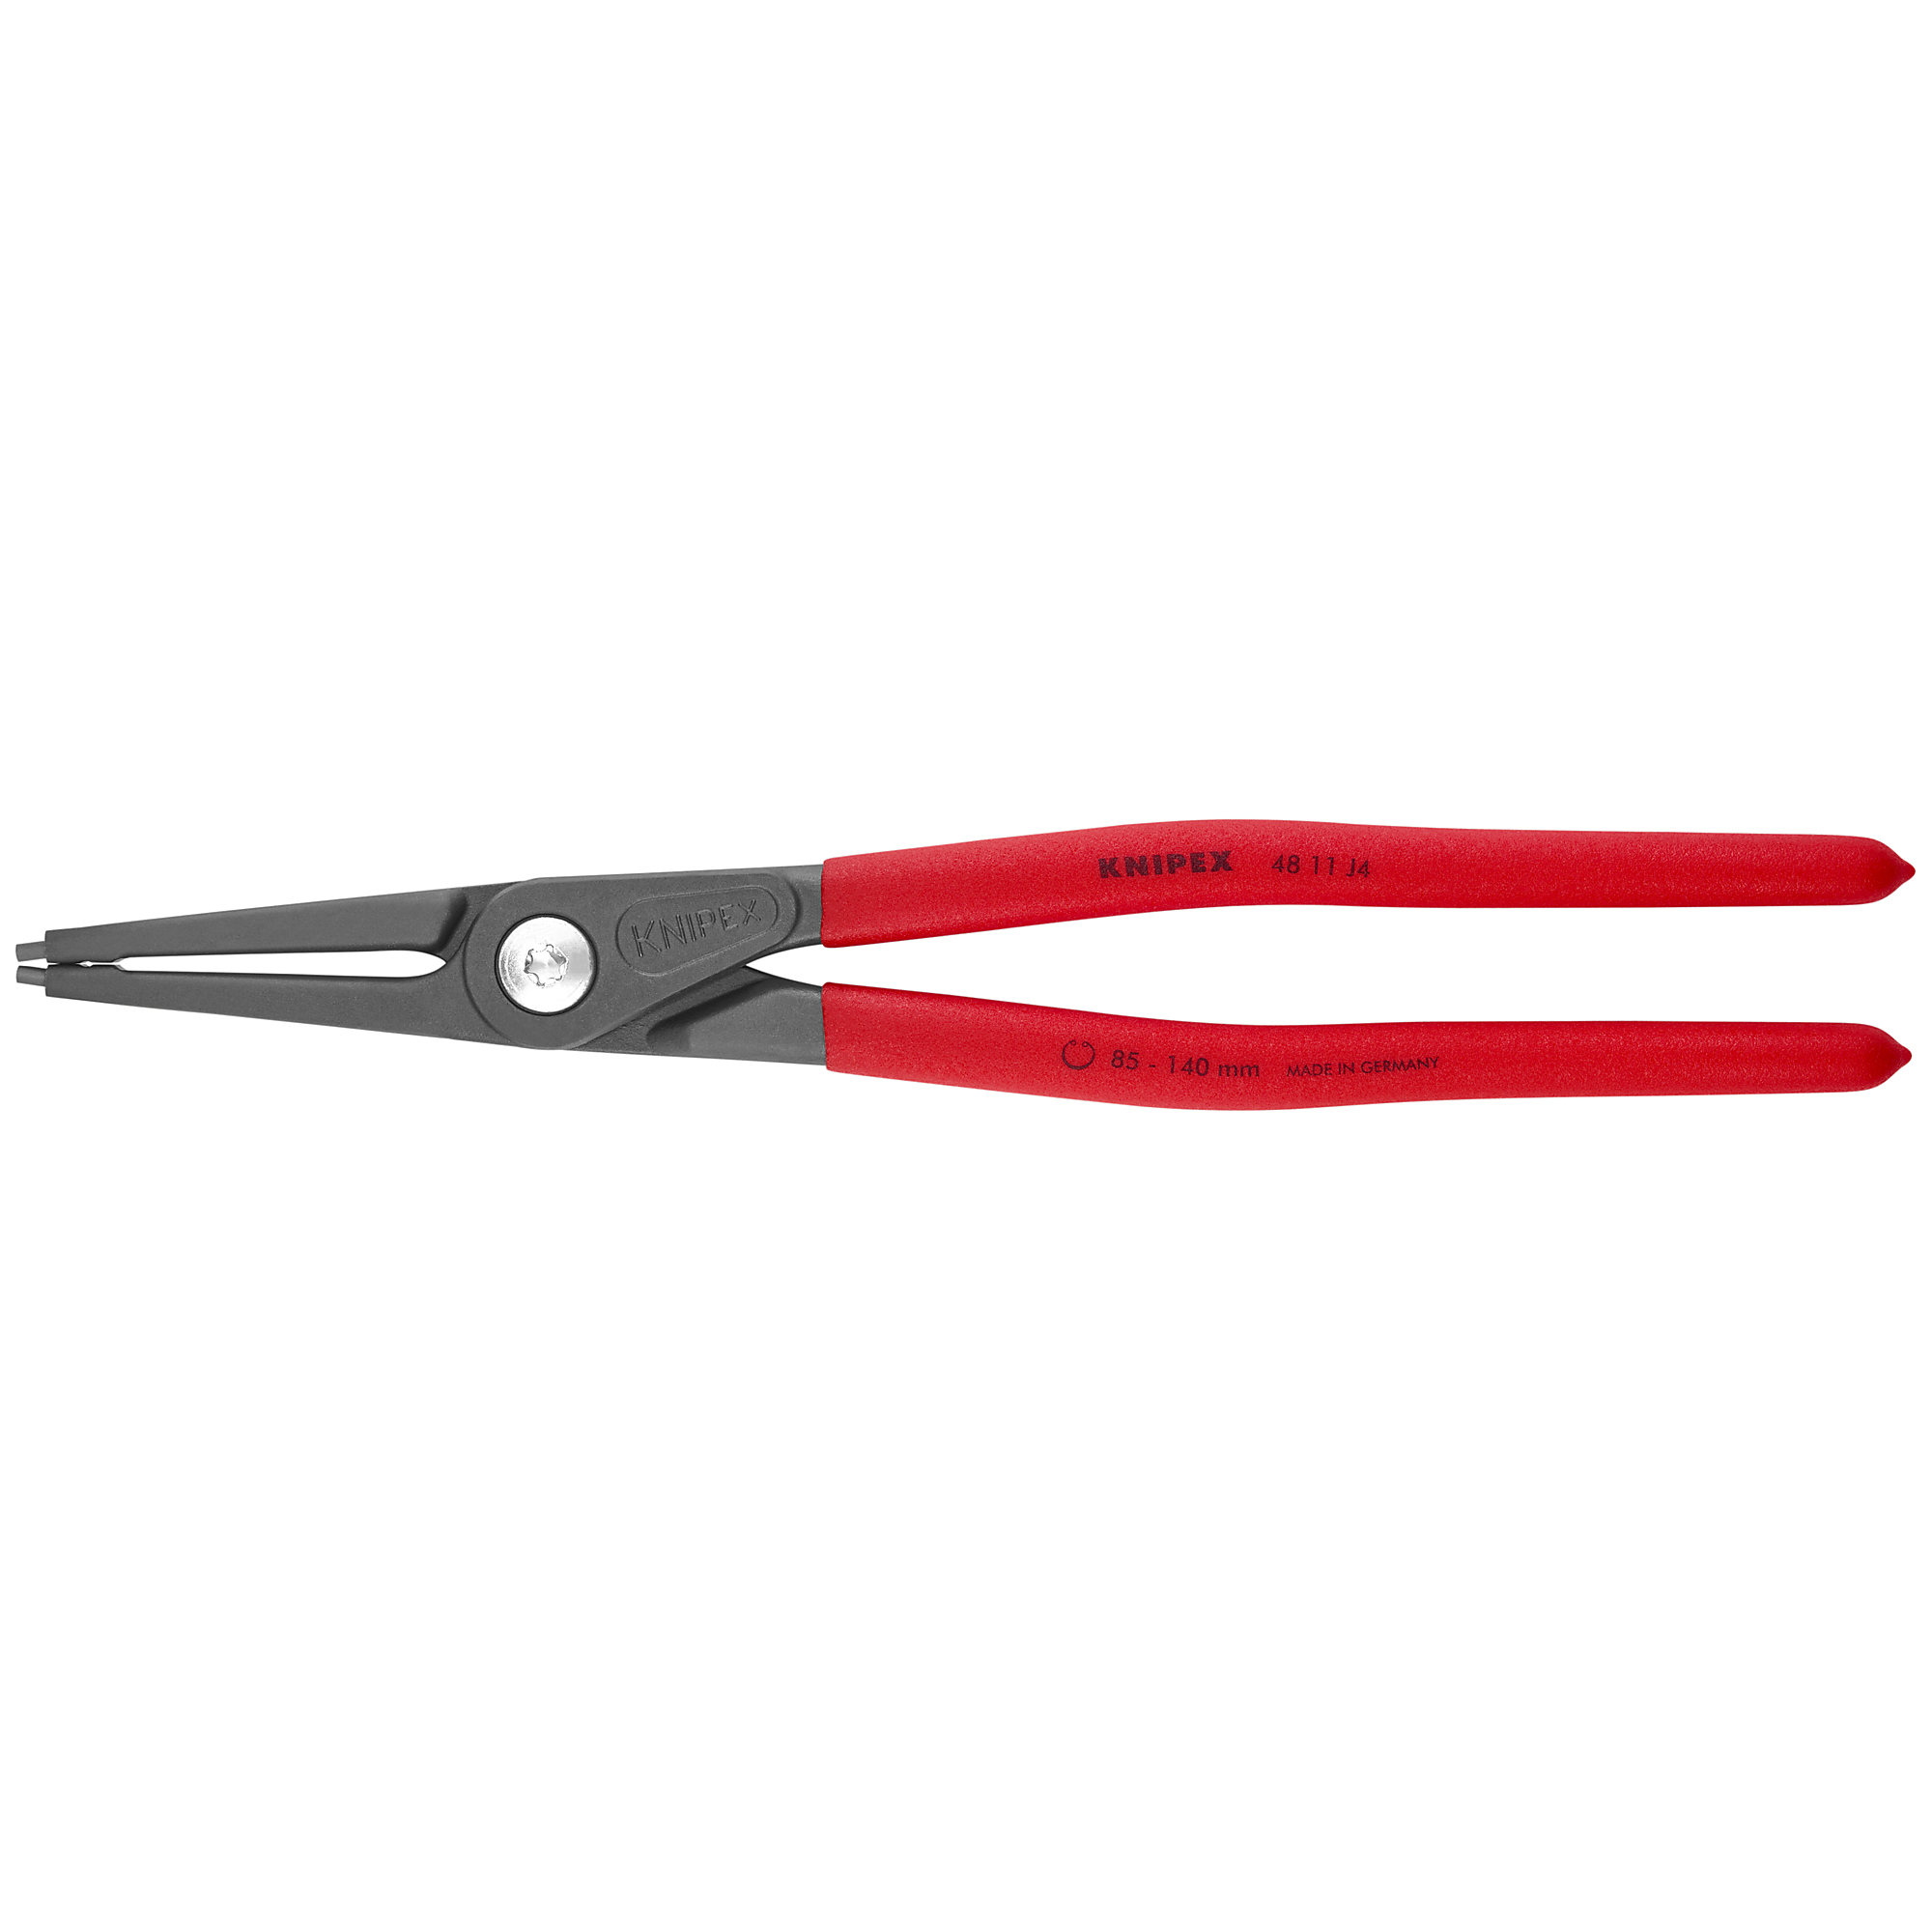 KNIPEX, Int Precision Snap Ring Pliers, 1/8Inch tip, 12.75Inch, Pieces (qty.) 1 Material Steel, Model 48 11 J4